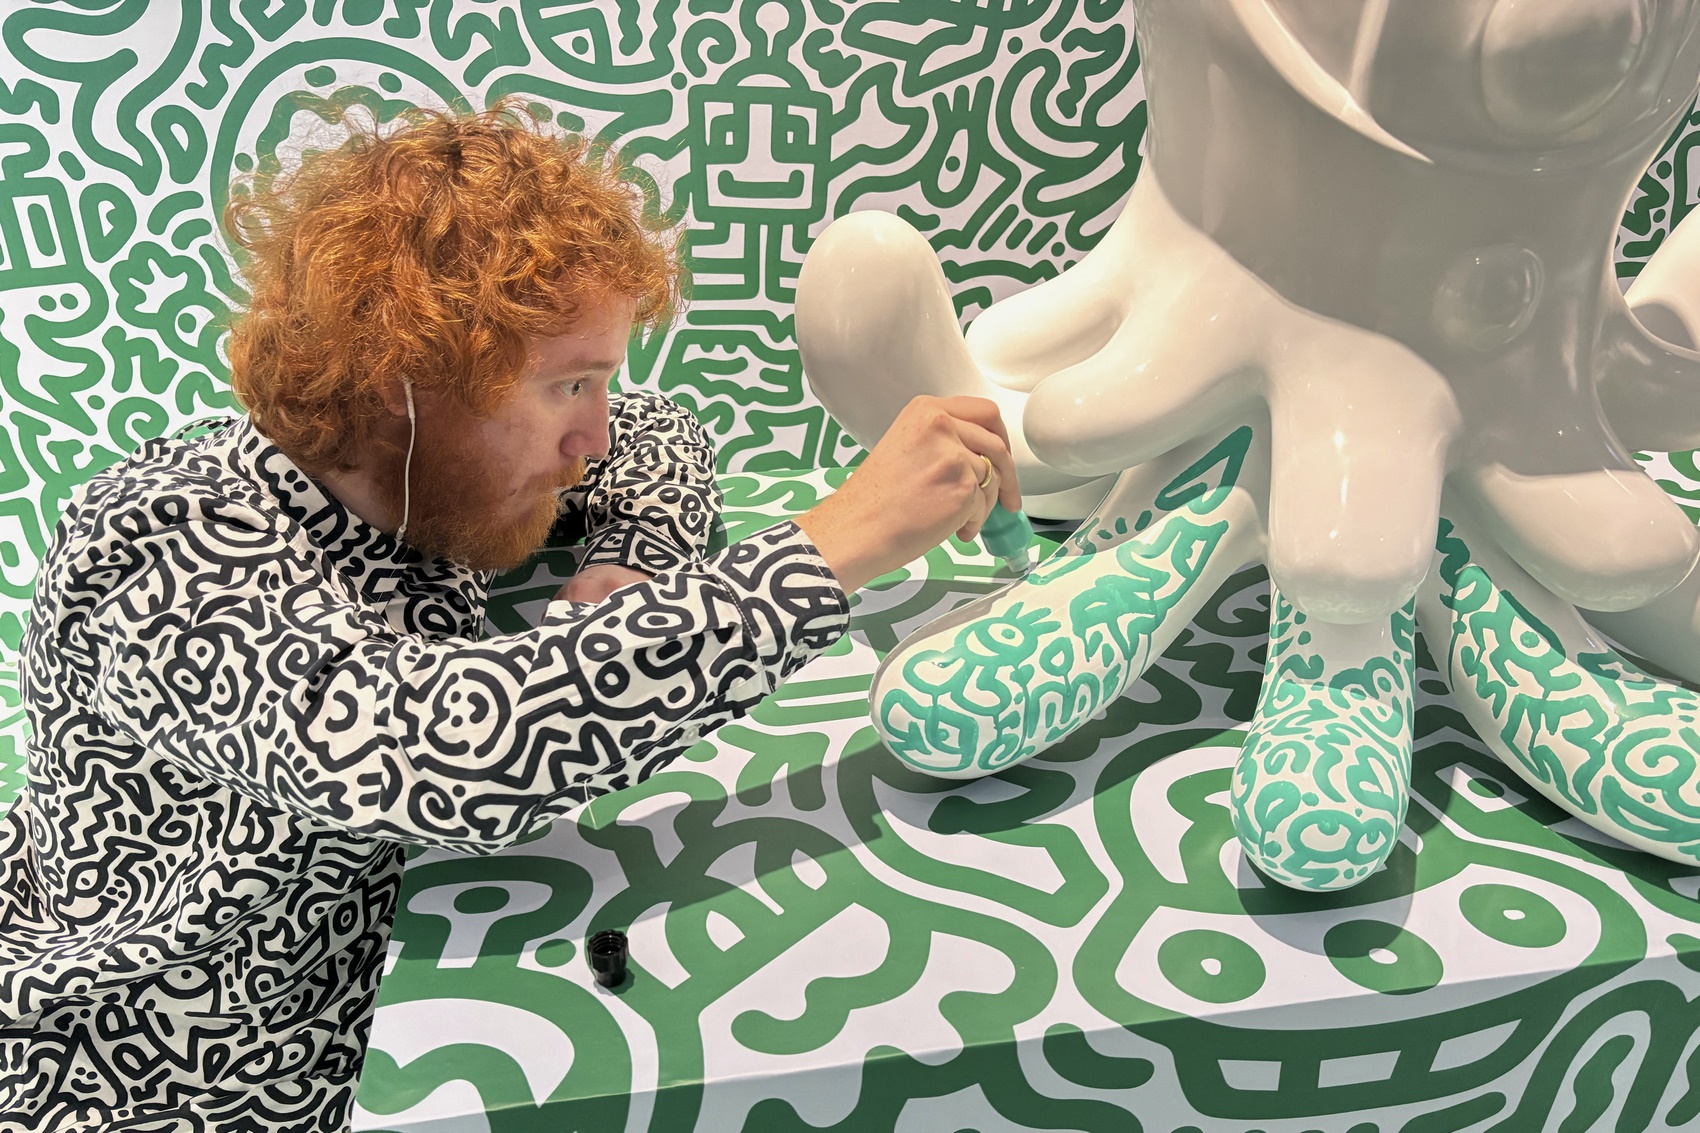 British artist Sam Cox, better known as Mr. Doodle, posing for a picture with his piece "The Doodles Leave Earth" at Pearl Lam Galleries in Hong Kong on November 16, 2023, Photo: Dene Chen/AFP.